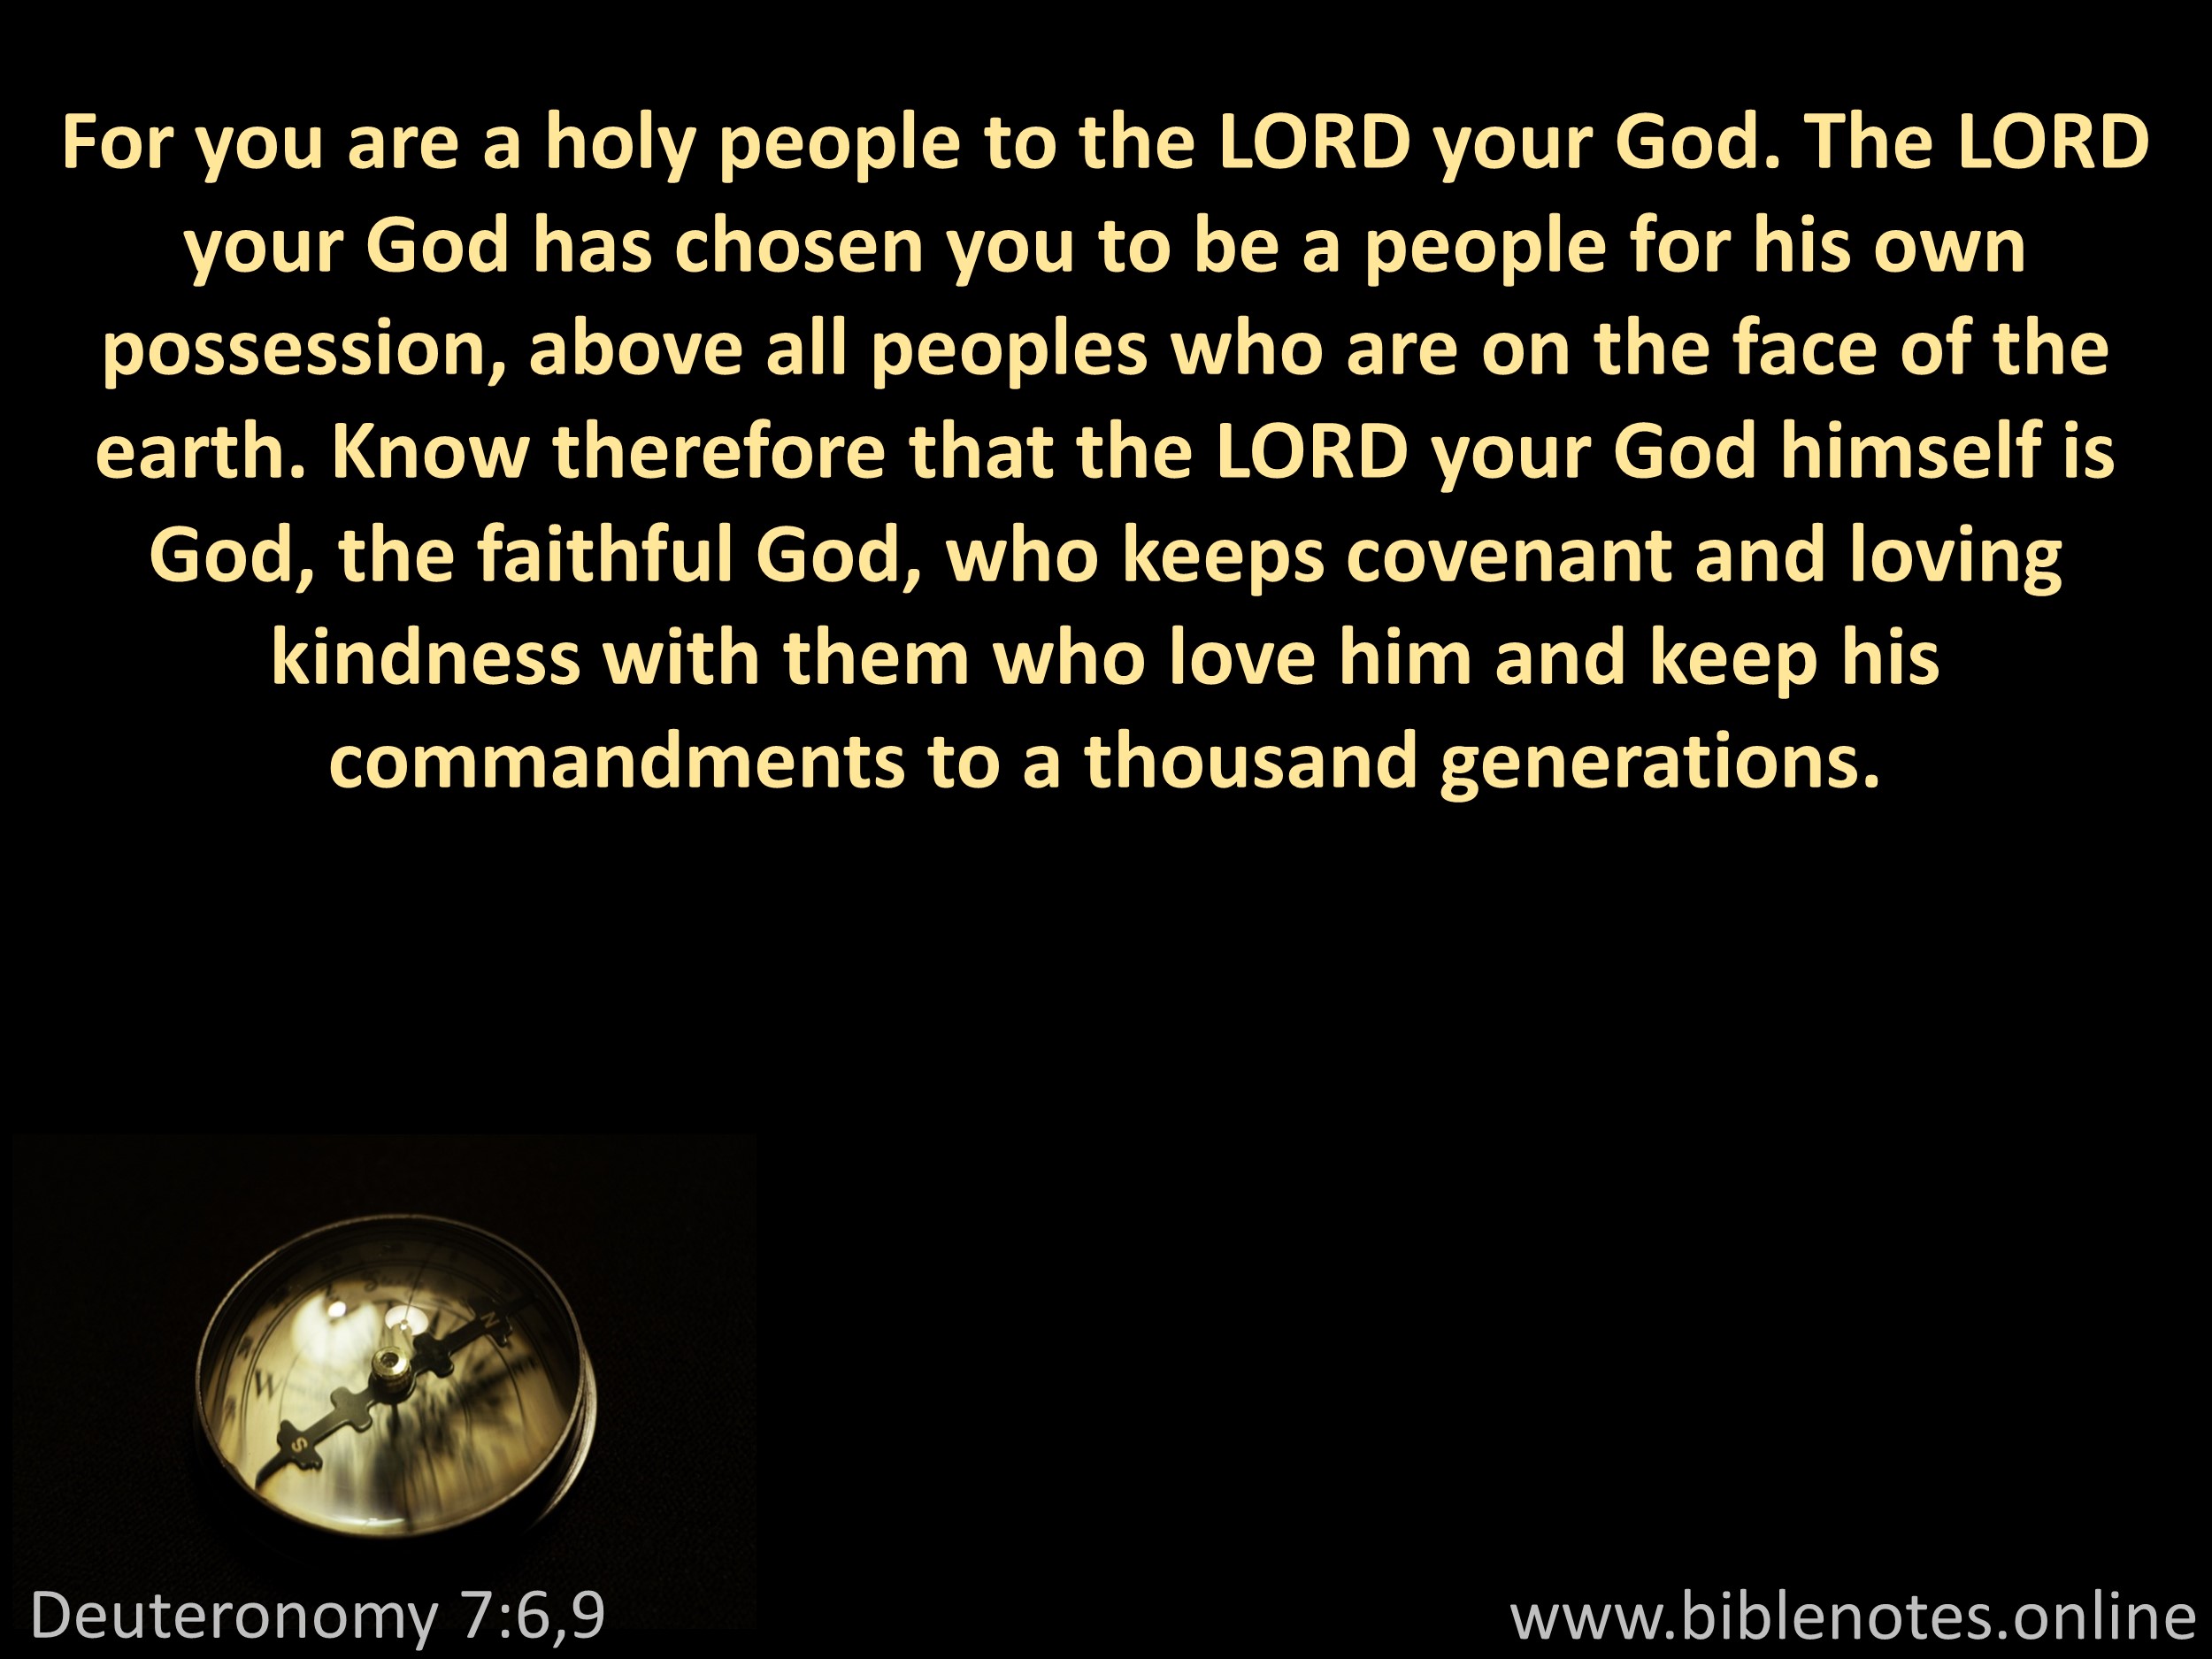 Bible Verse from Deuteronomy Chapter 7